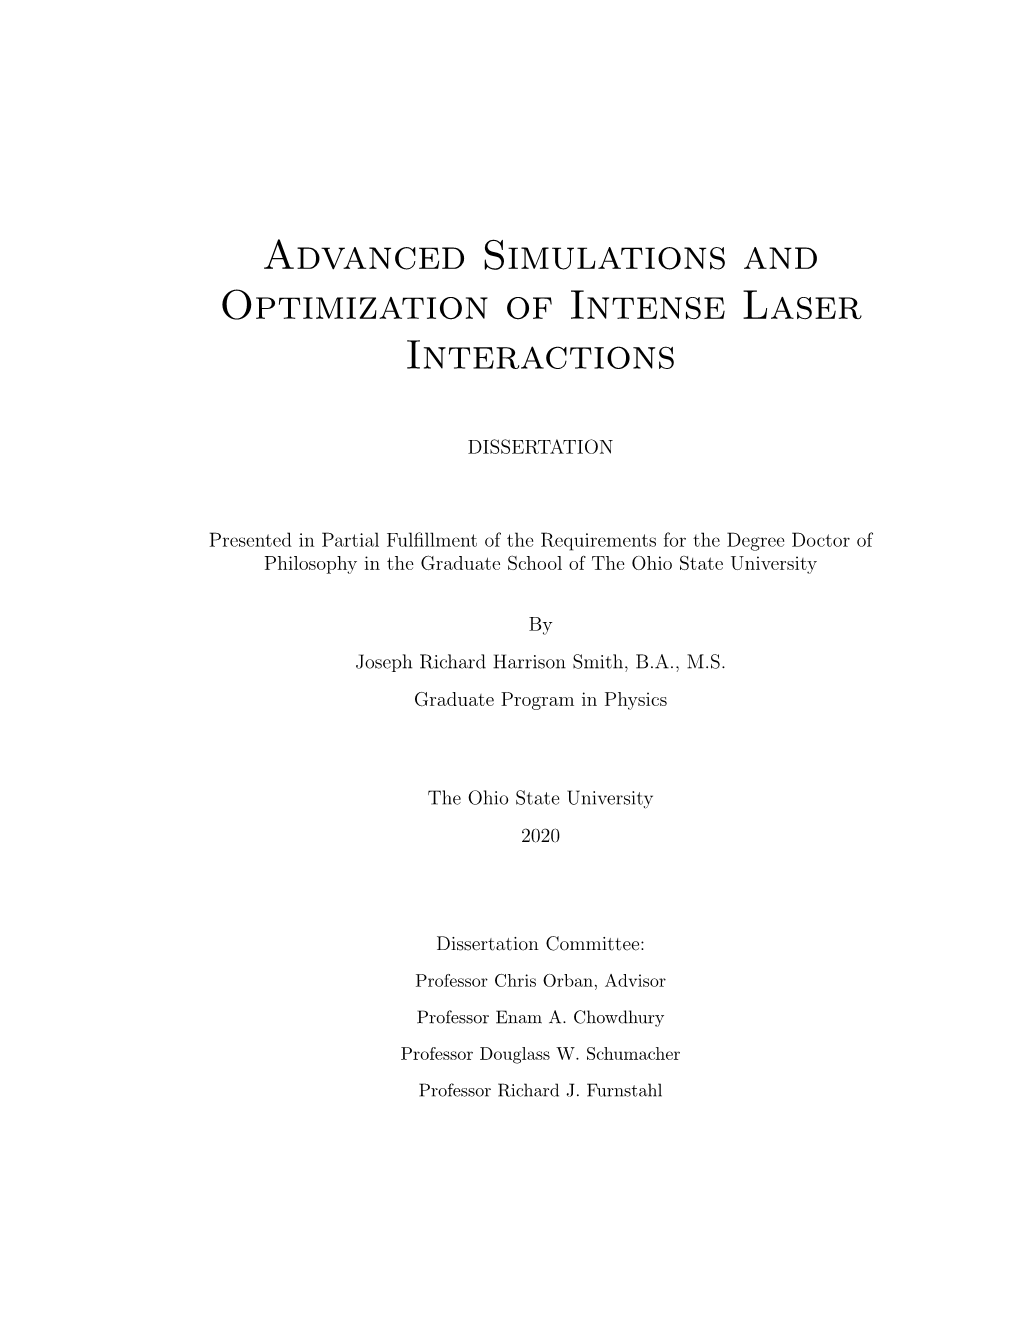 Advanced Simulations and Optimization of Intense Laser Interactions